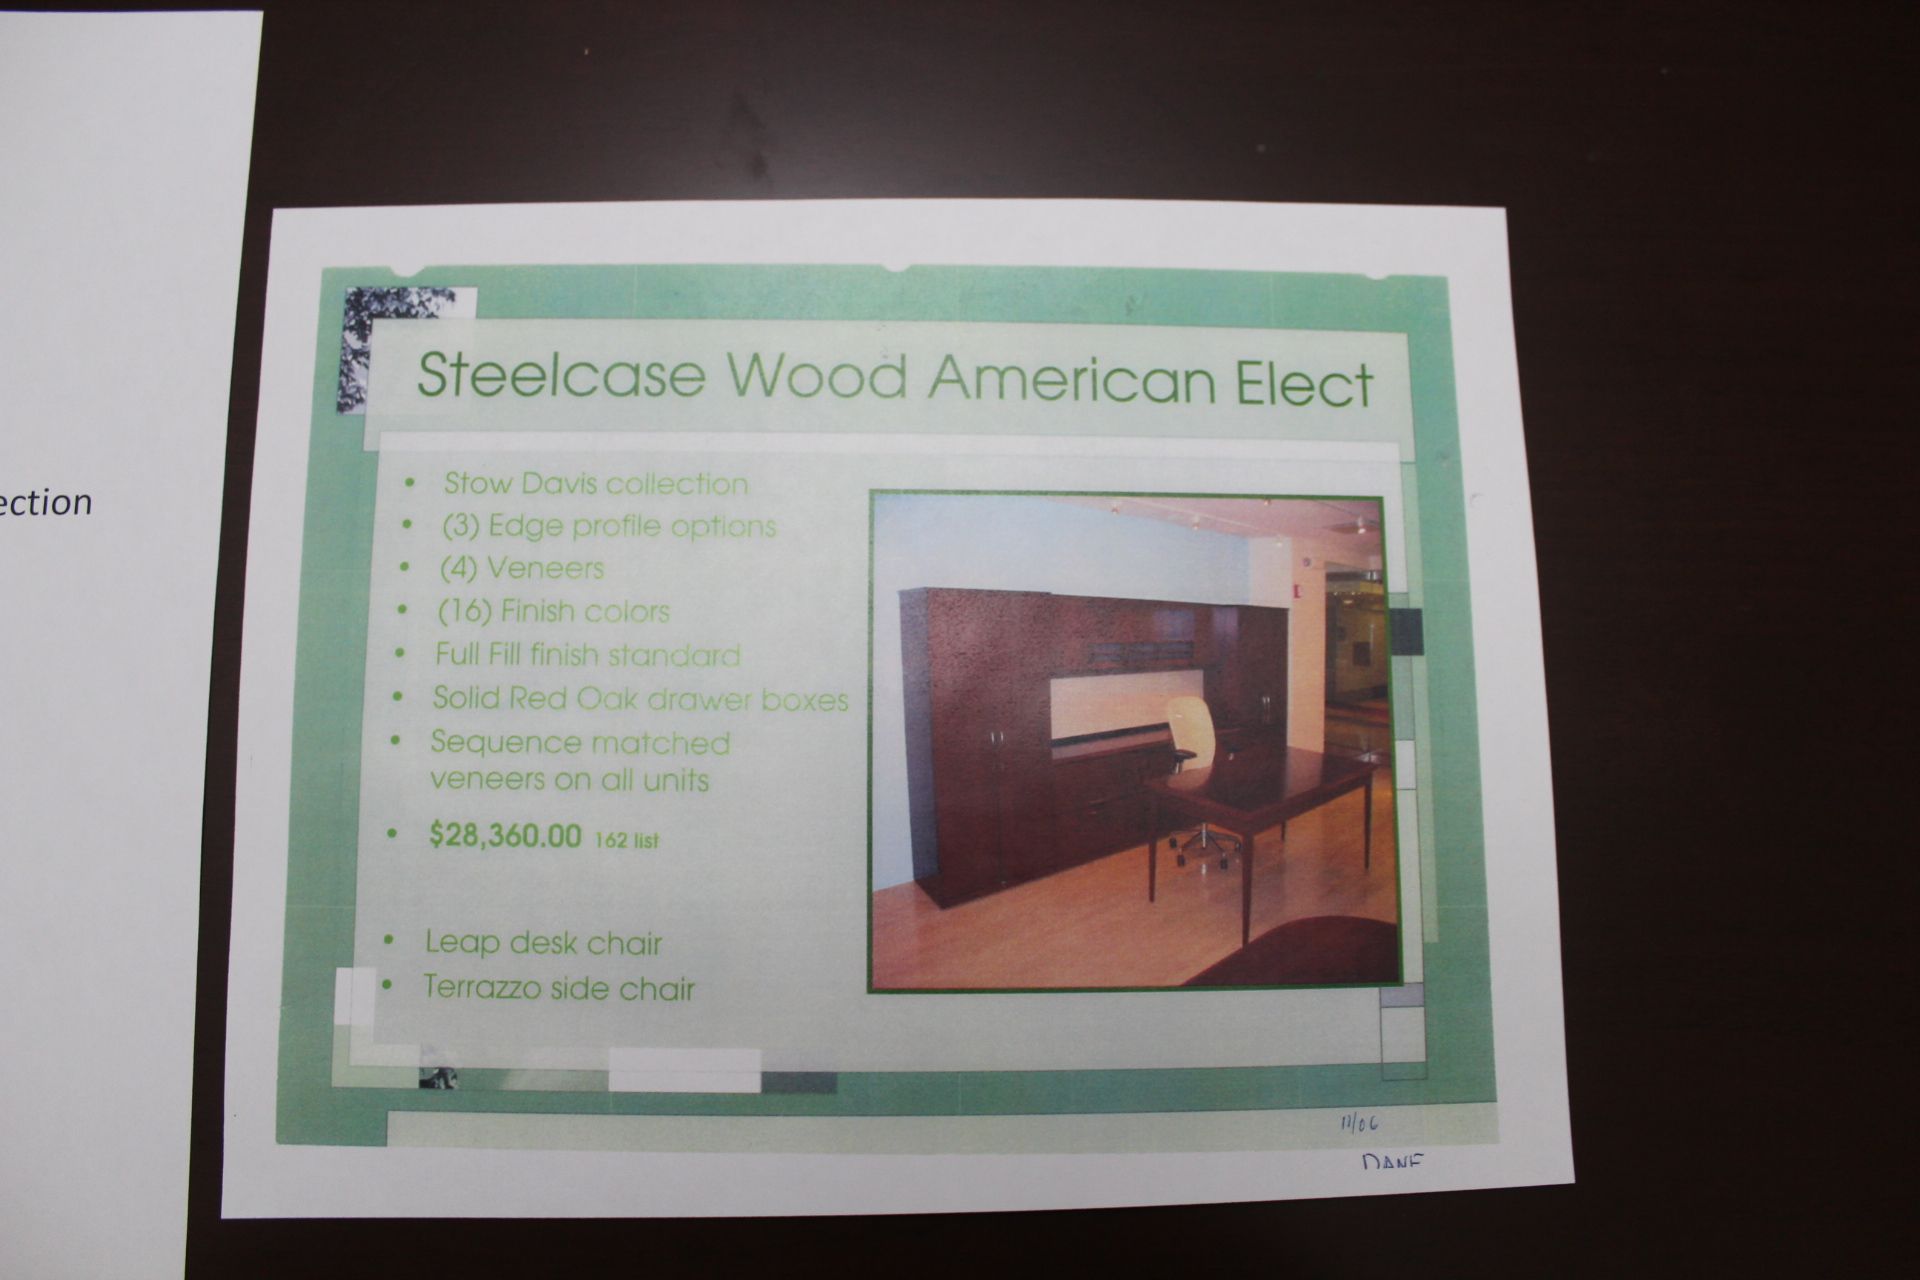 Steelcase Wood American Elect - Image 5 of 6